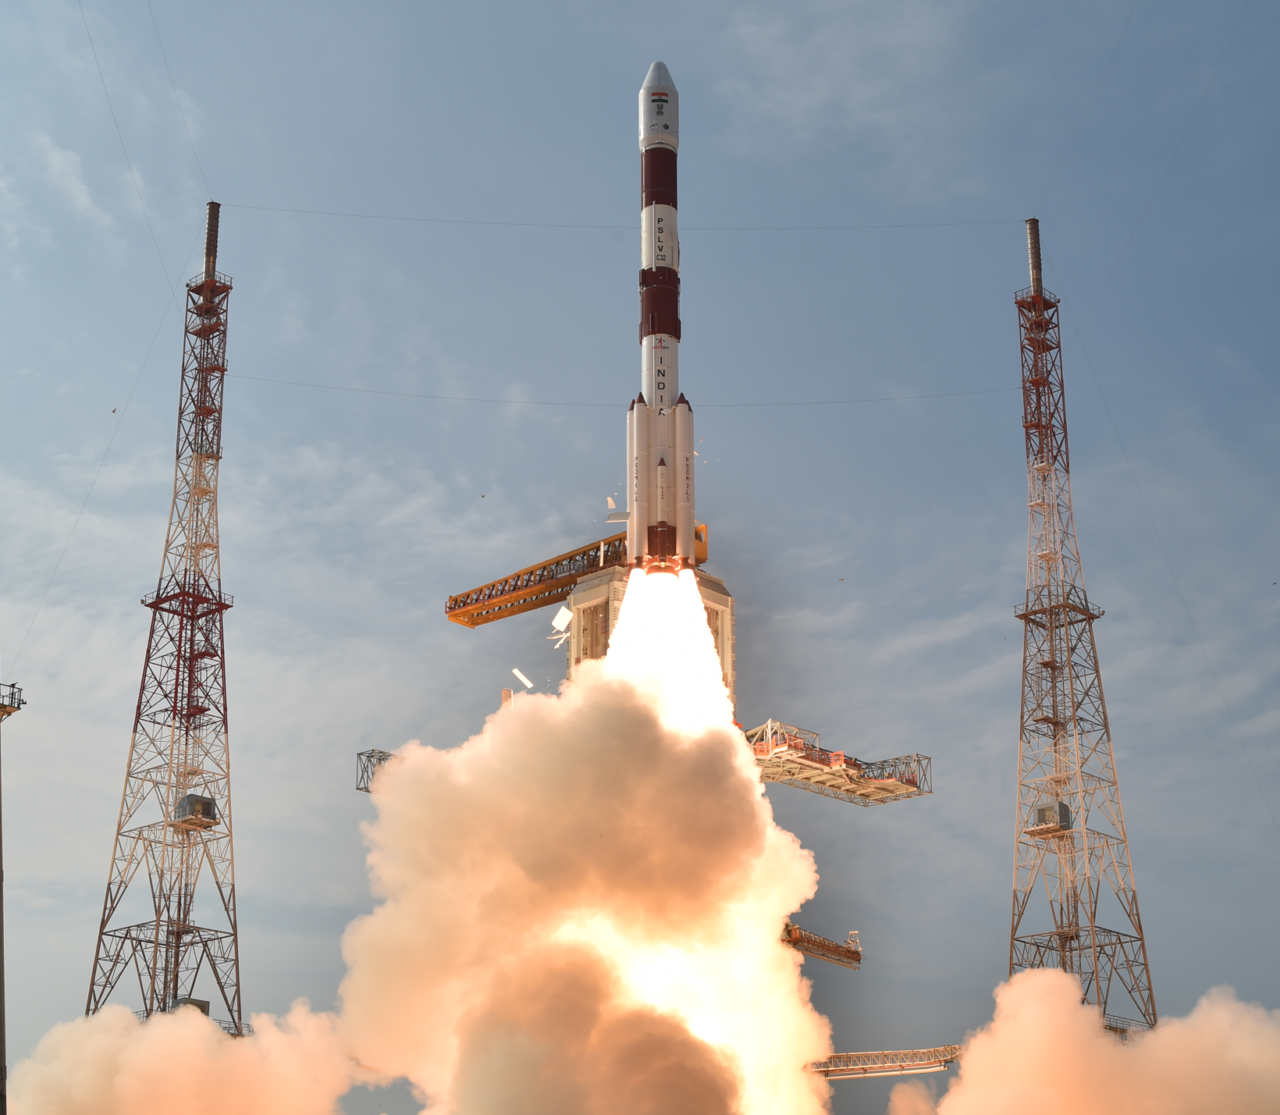 ISRO's PSLV launches the IRNSS-1F mission in March 2016. Photo: ISRO.